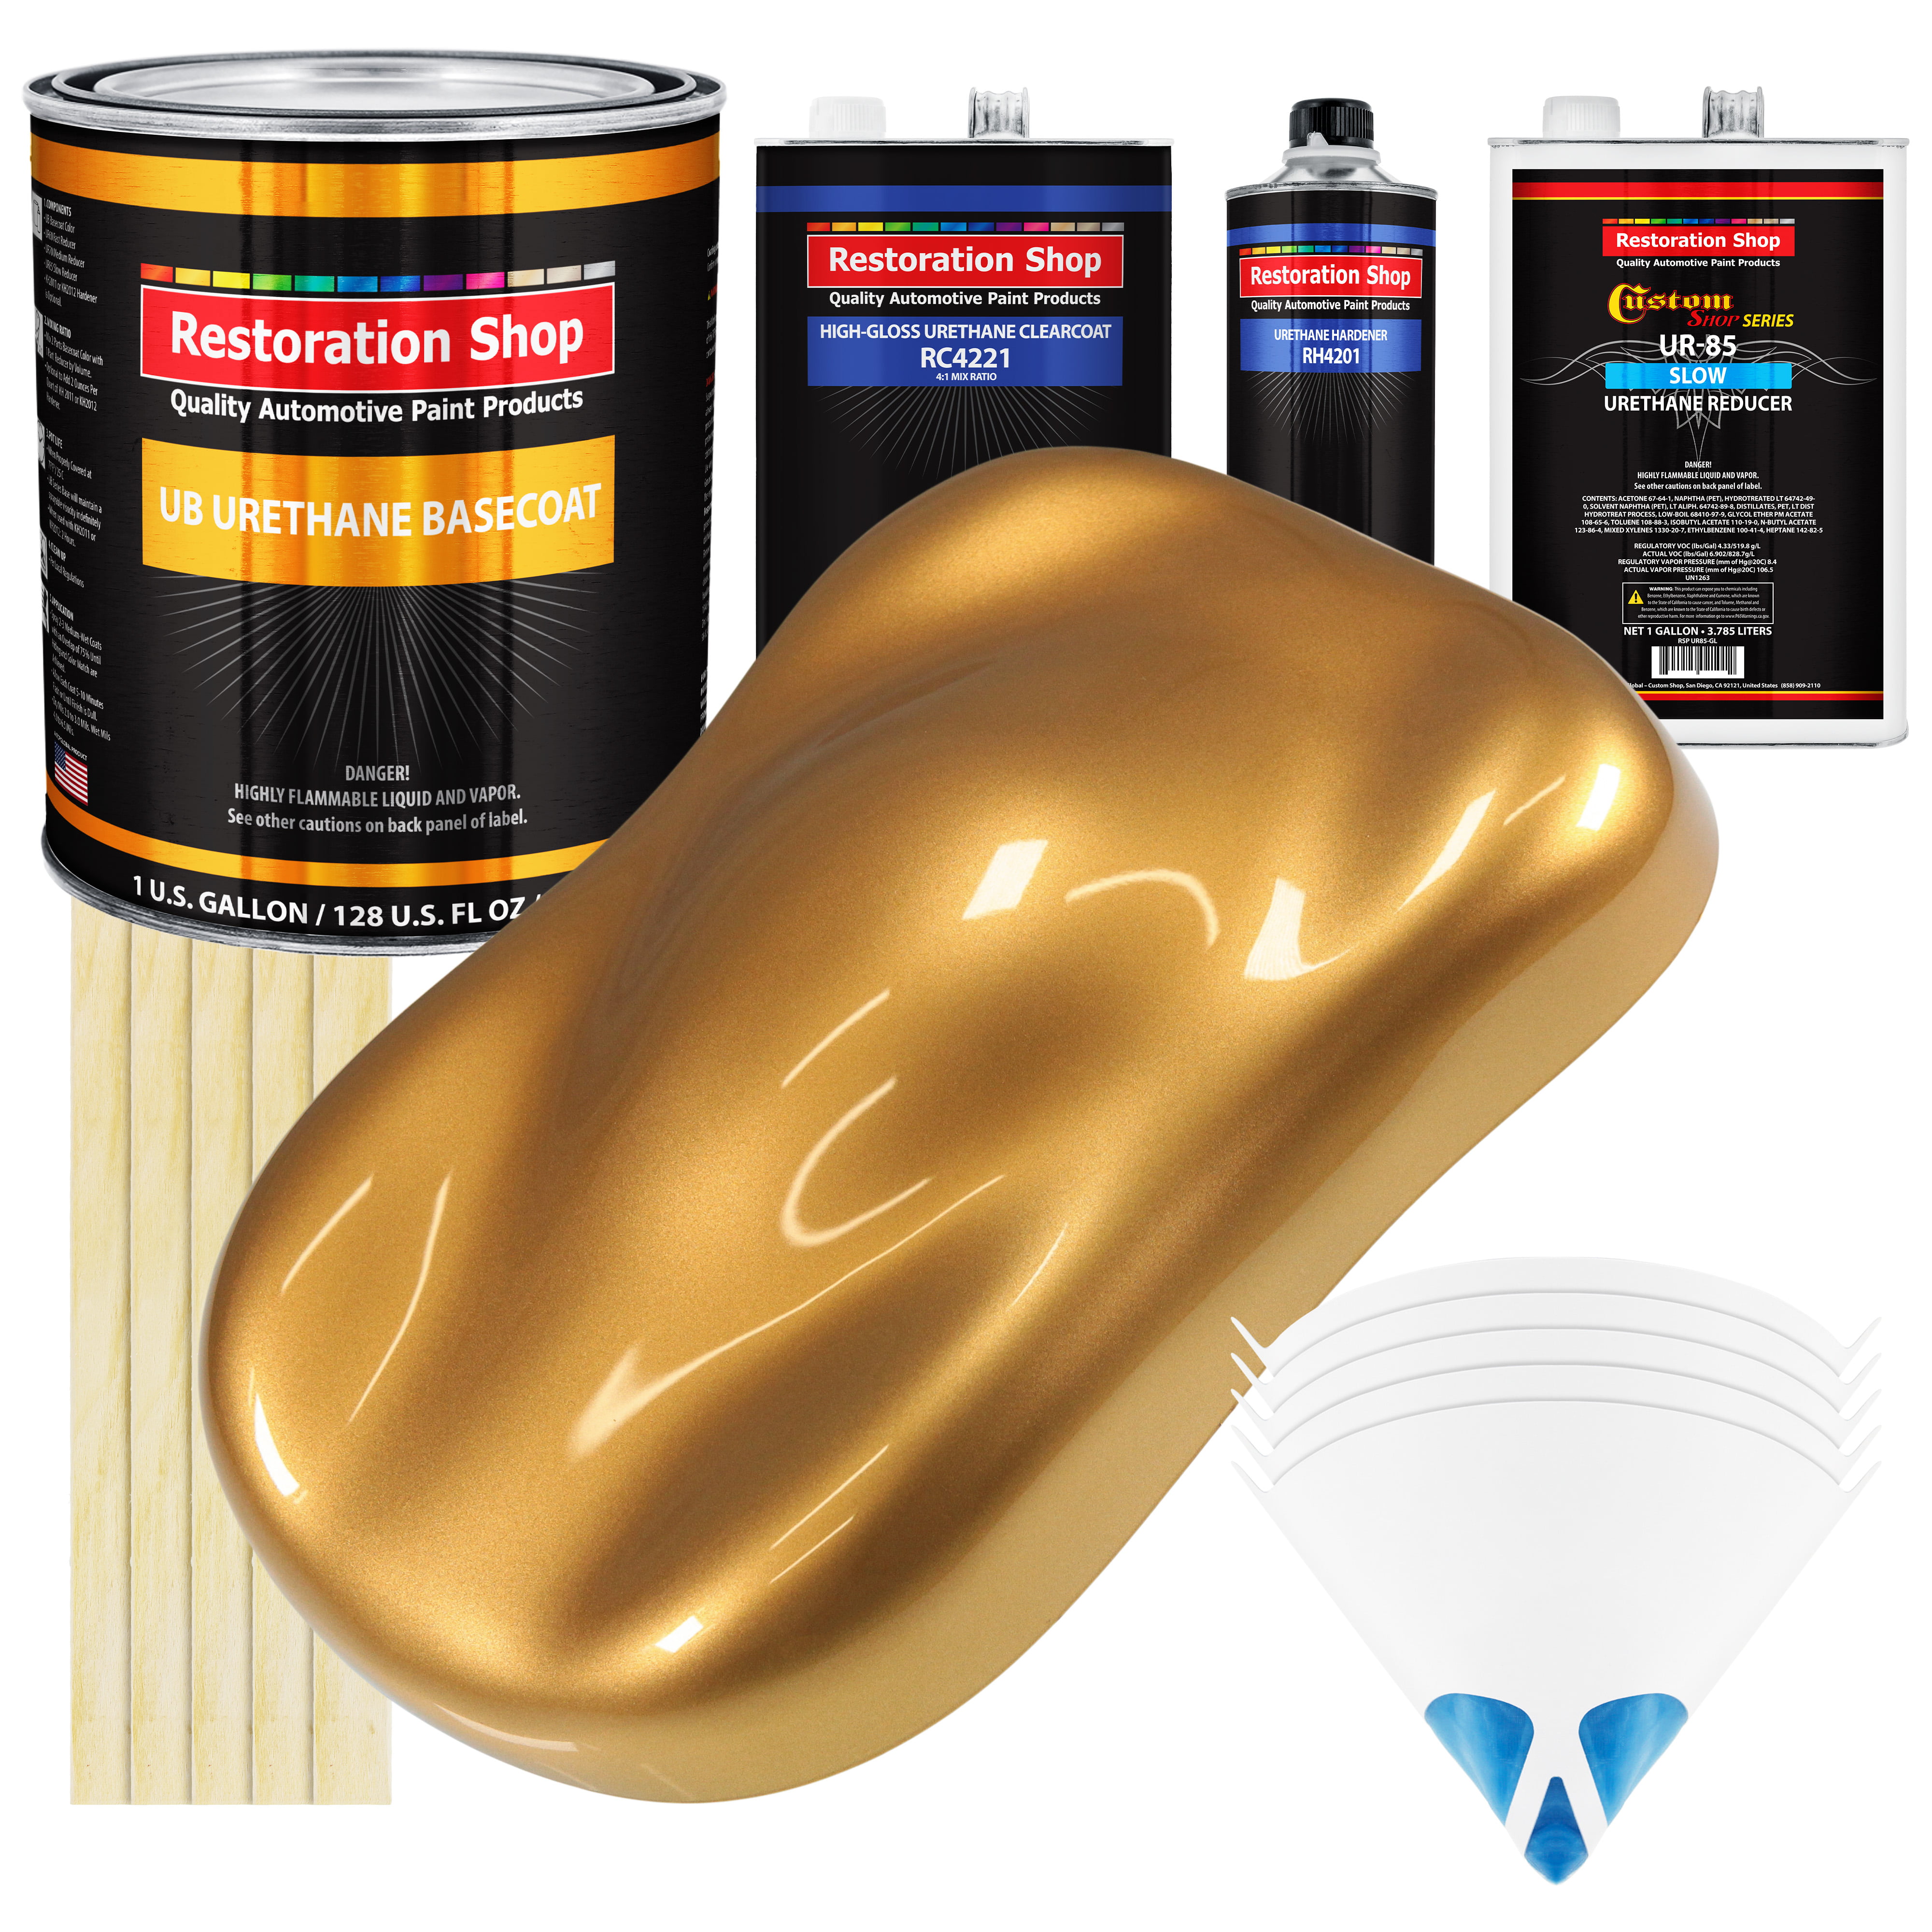 Dura-gold Premium Black Dry Guide Coat Kit, 7 Ounces (200 Grams) - Powder That Instantly Highlights Auto Bodyshop Repair Surface Imperfections Defects